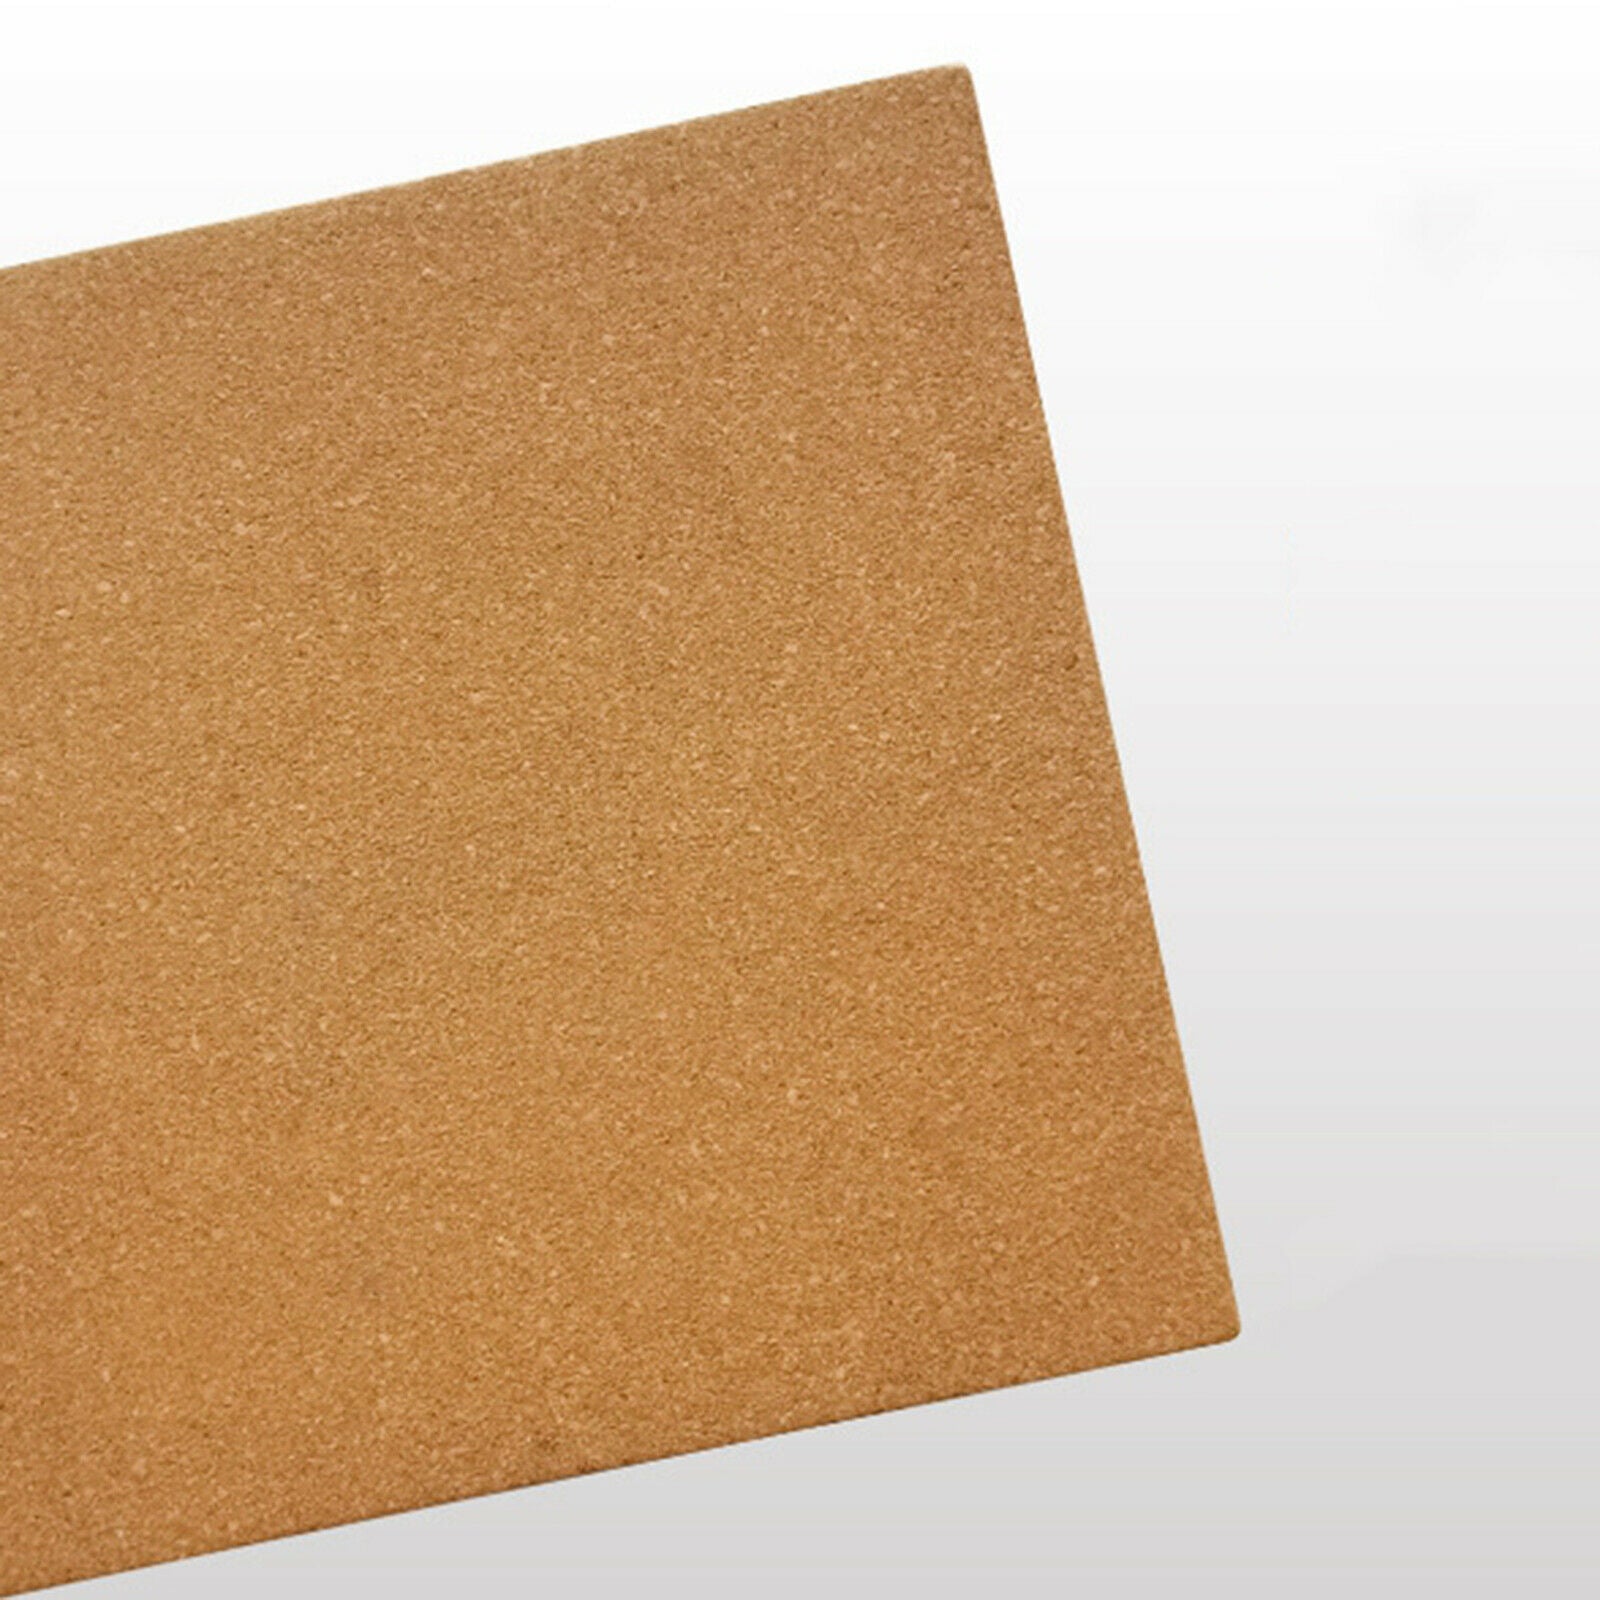 4Pcs Cork Board 12"x12" Adhesive Backing Home Office Memo Notice Pin Boards